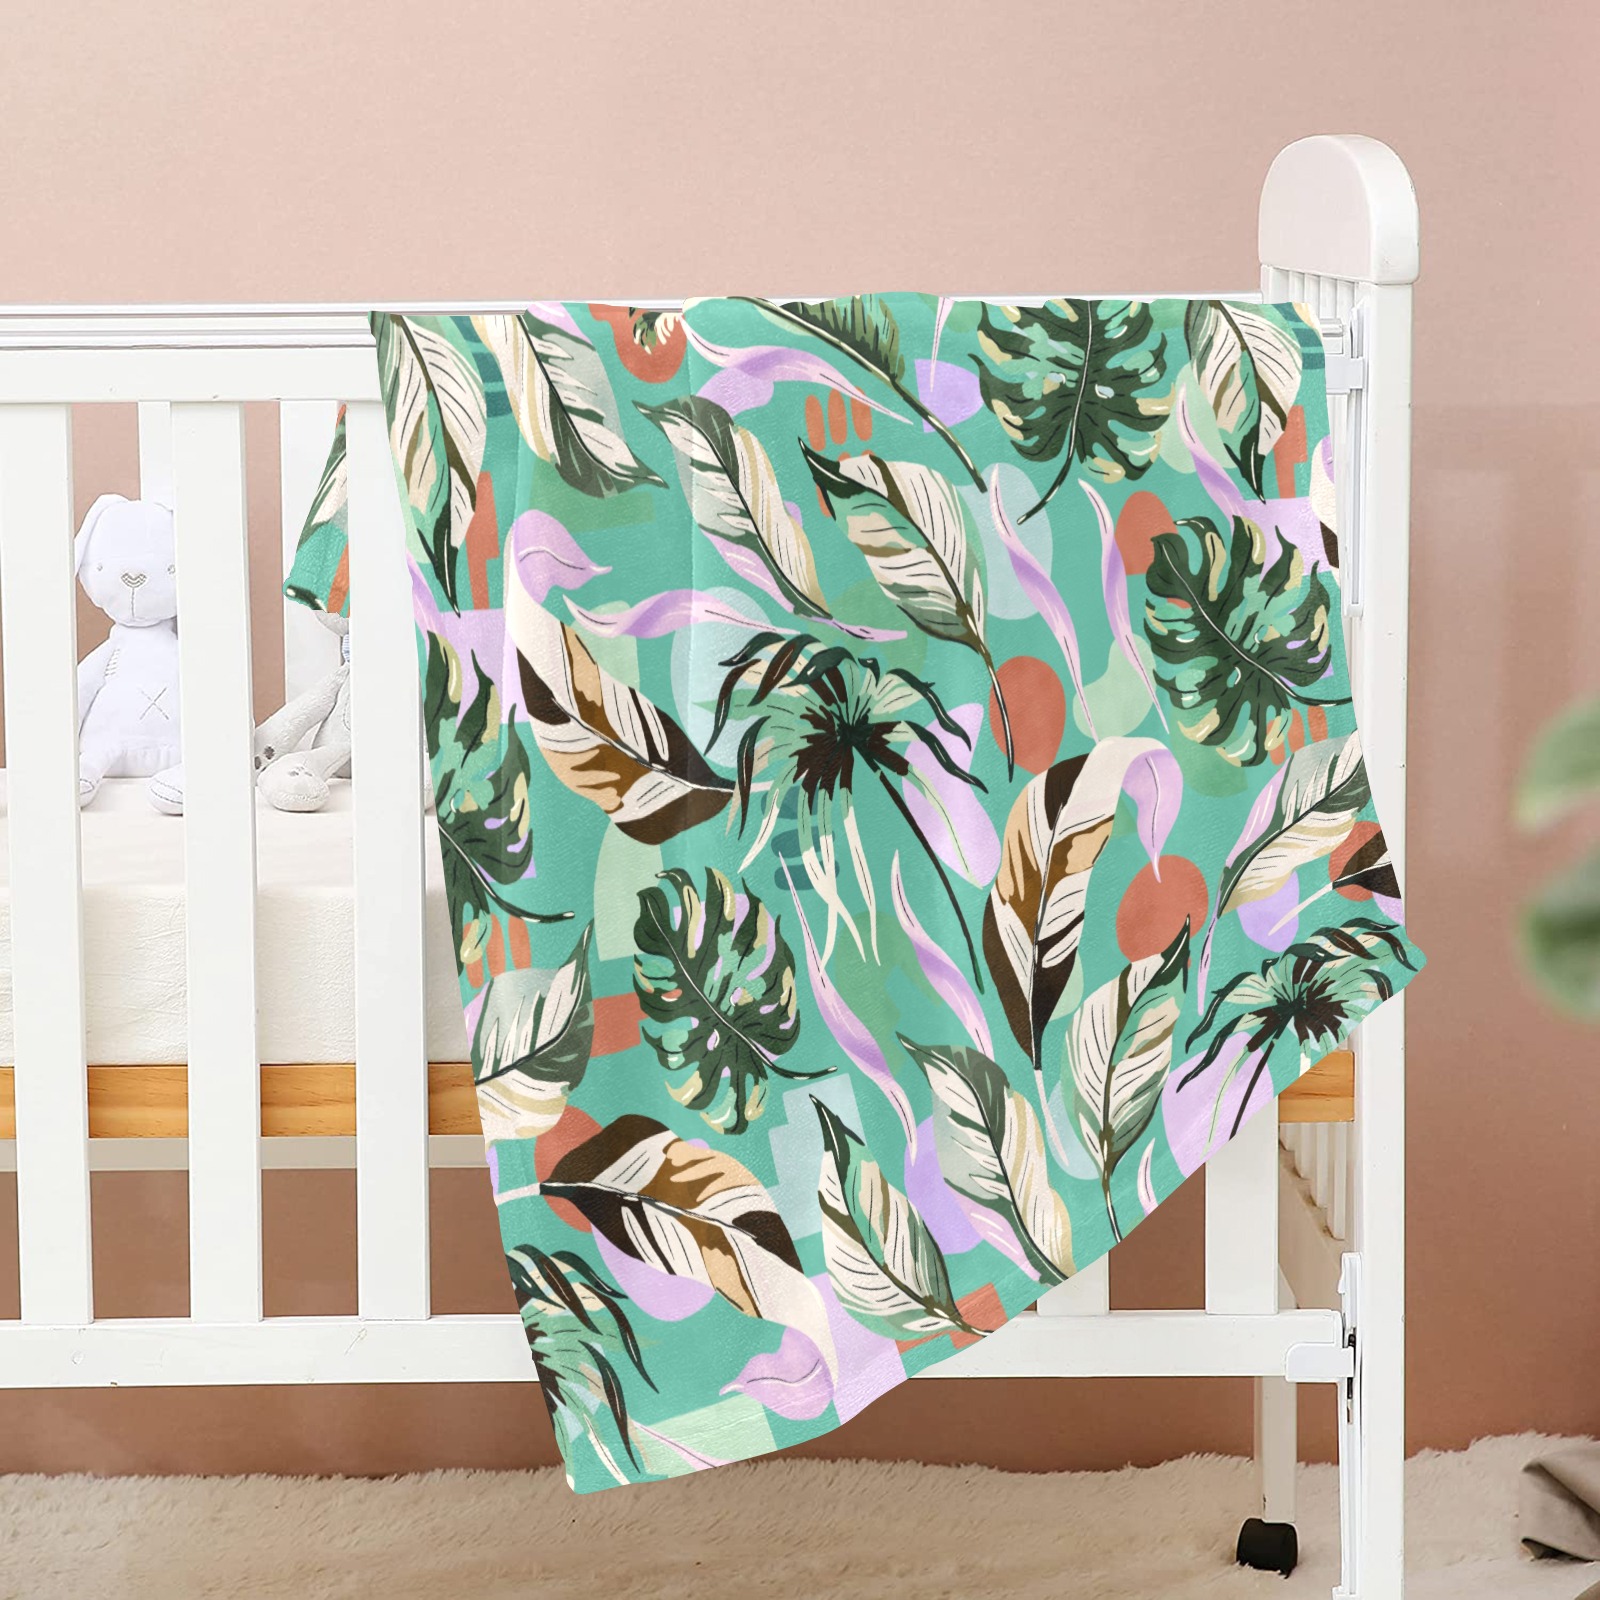 Tropical abstract shapes 58 Baby Blanket 40"x50"